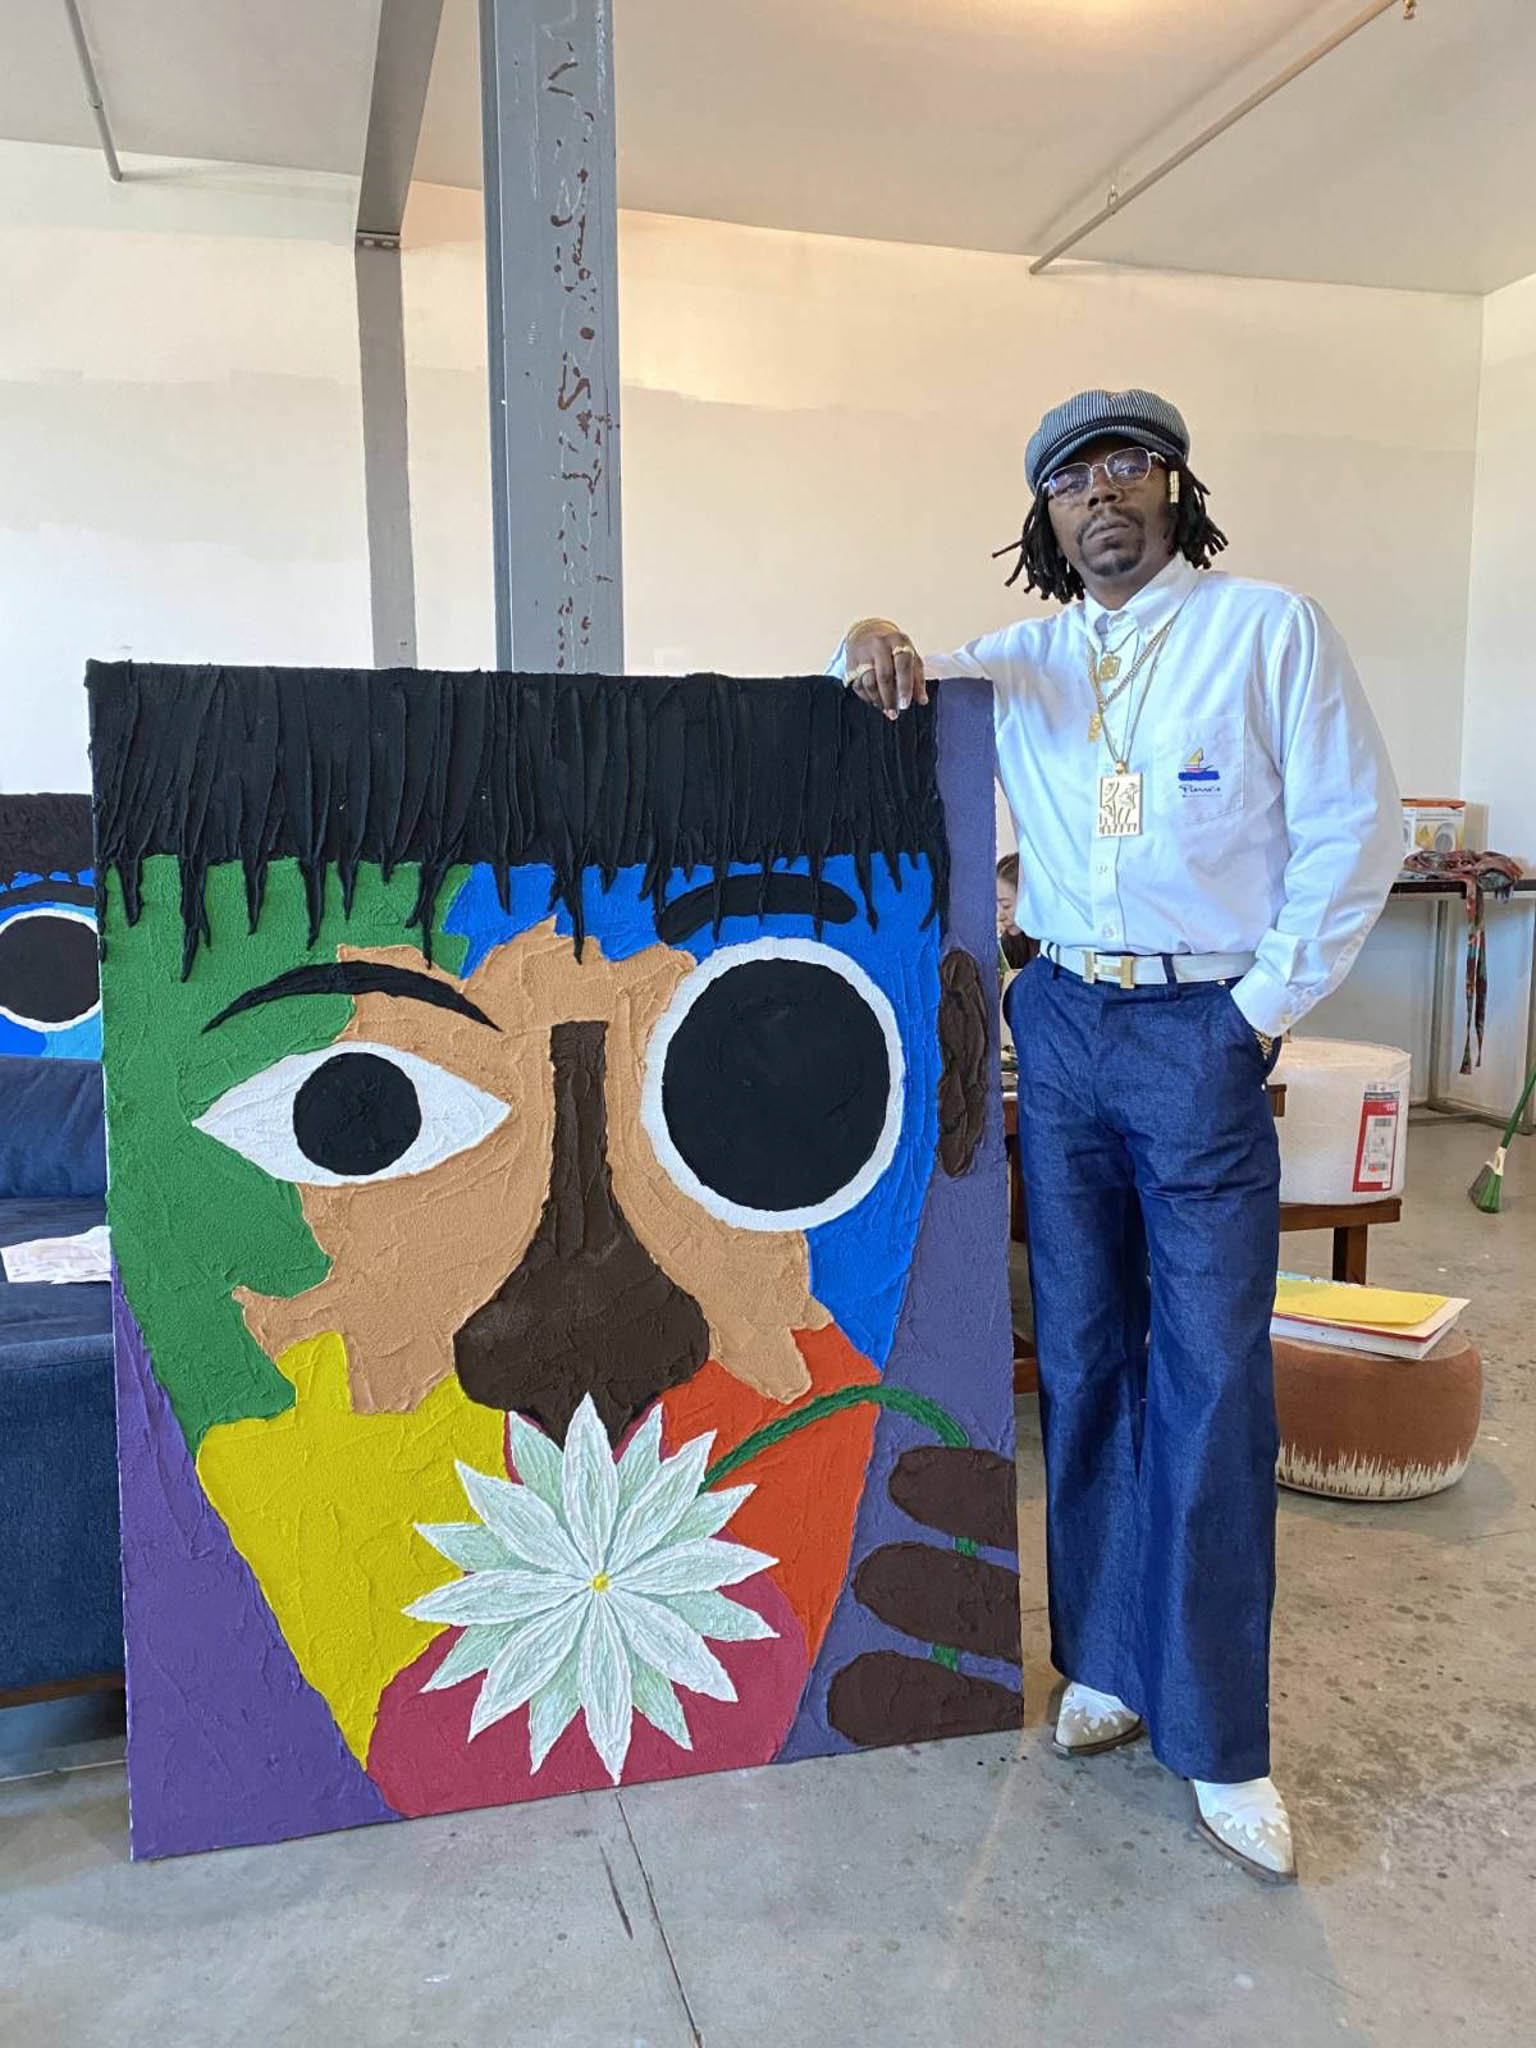 An artist stands beside his colorful work of art of an expressionist portrait.